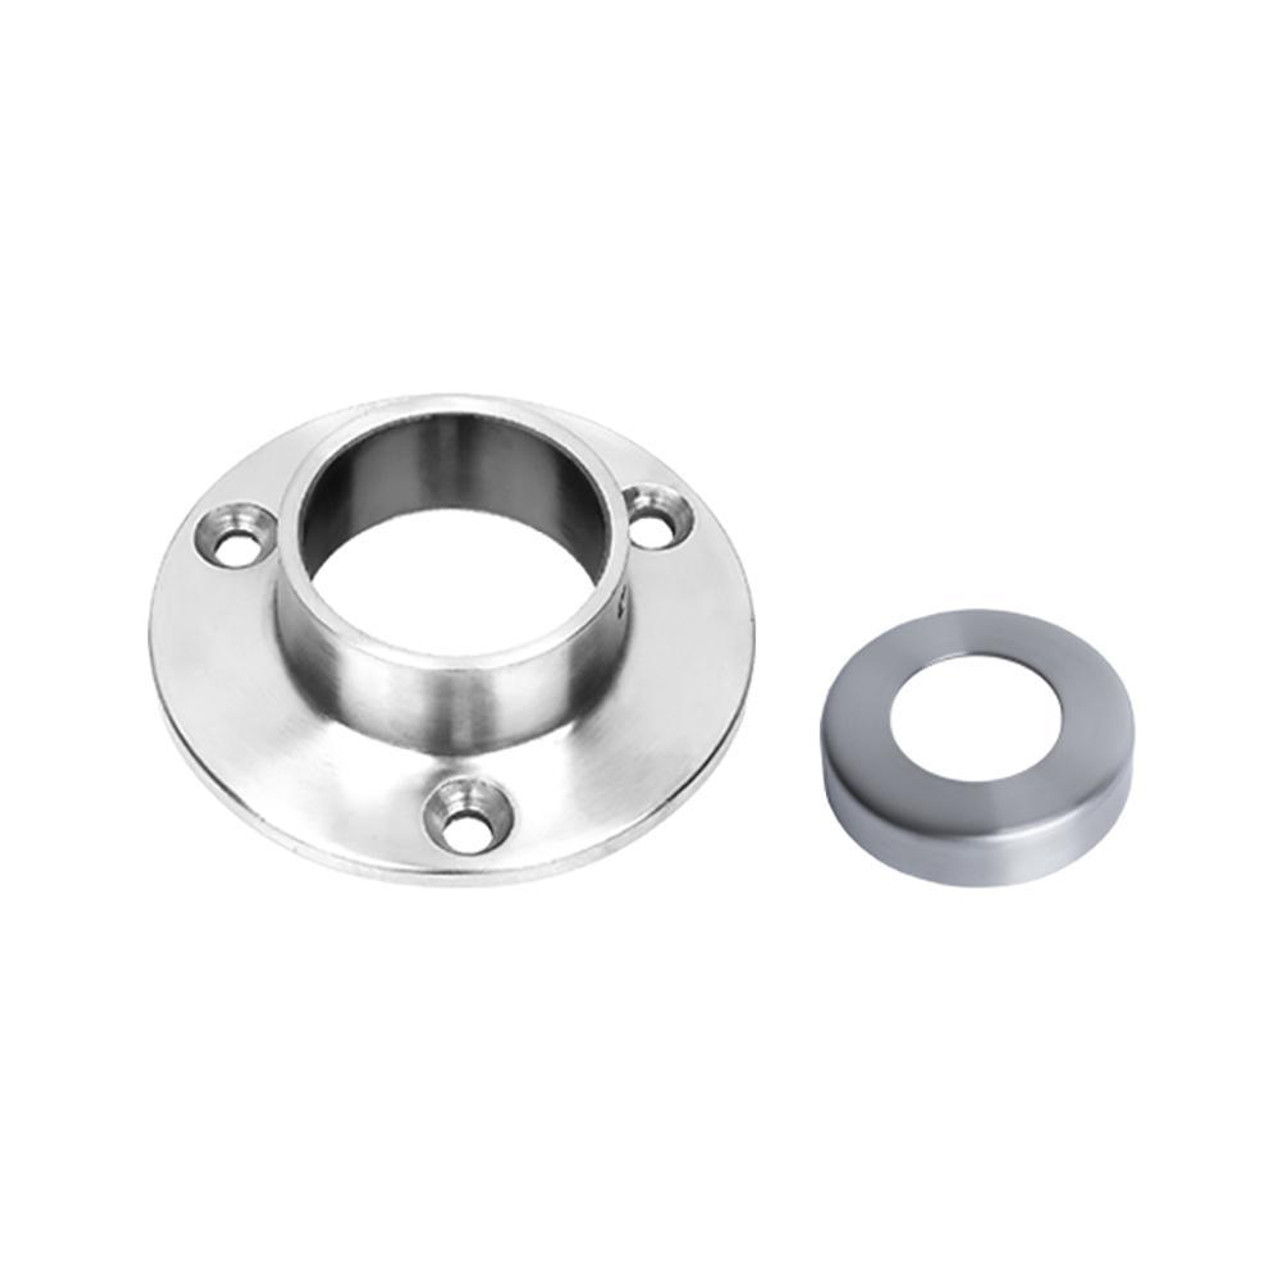 Wall Mount Flange for 42.4 mm Round Rail